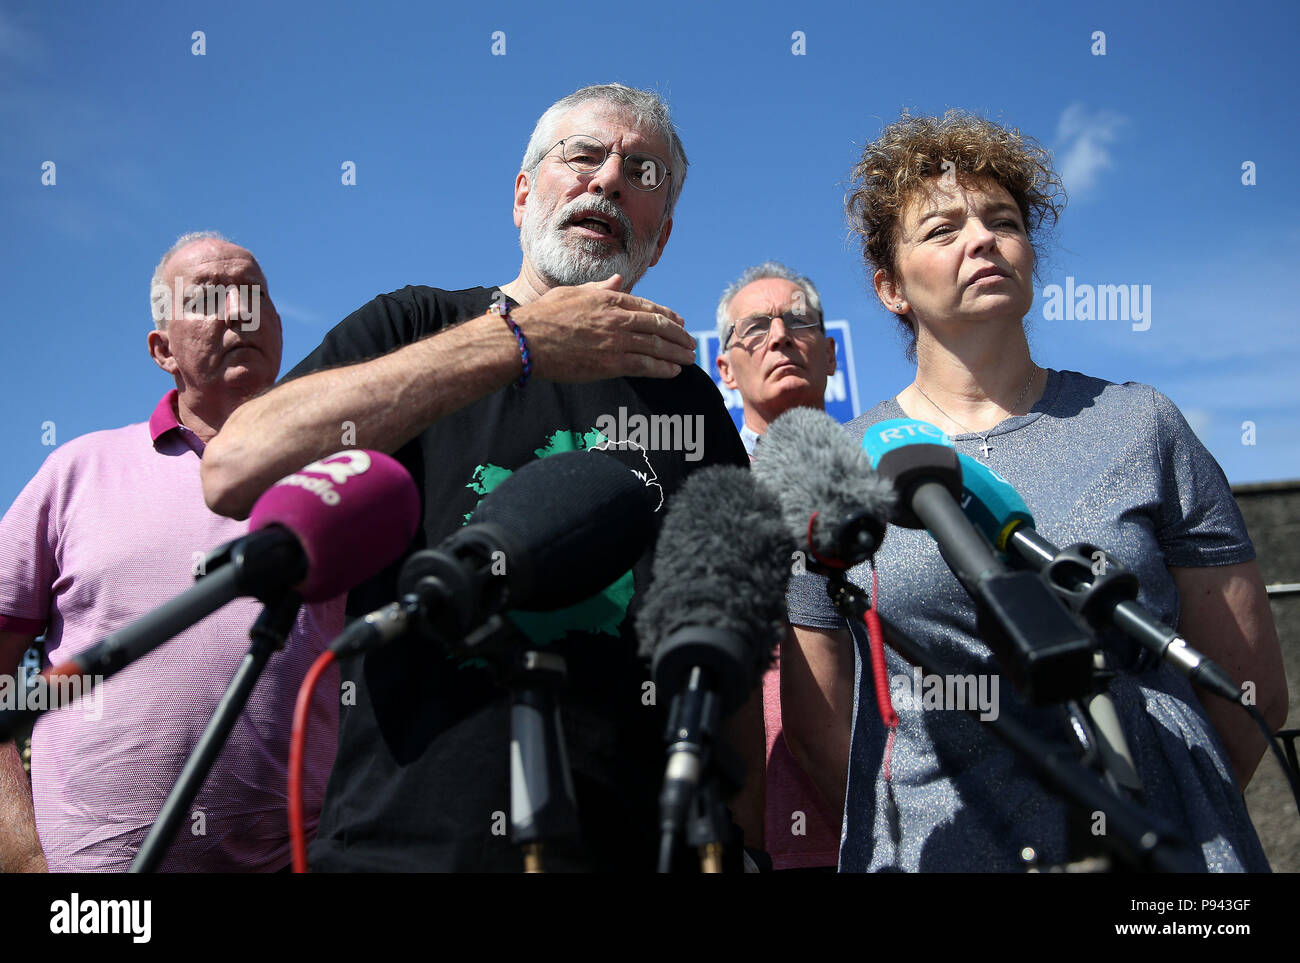 Former Sinn Fein president Gerry Adams at a press conference at Connolly House in Belfast alongside prominent Sinn Fein members (from left) Bobby Storey, Gerry Kelly, and Caral Ni Chuilin following an explosives device attack on his and Bobby Storey's homes. Stock Photo